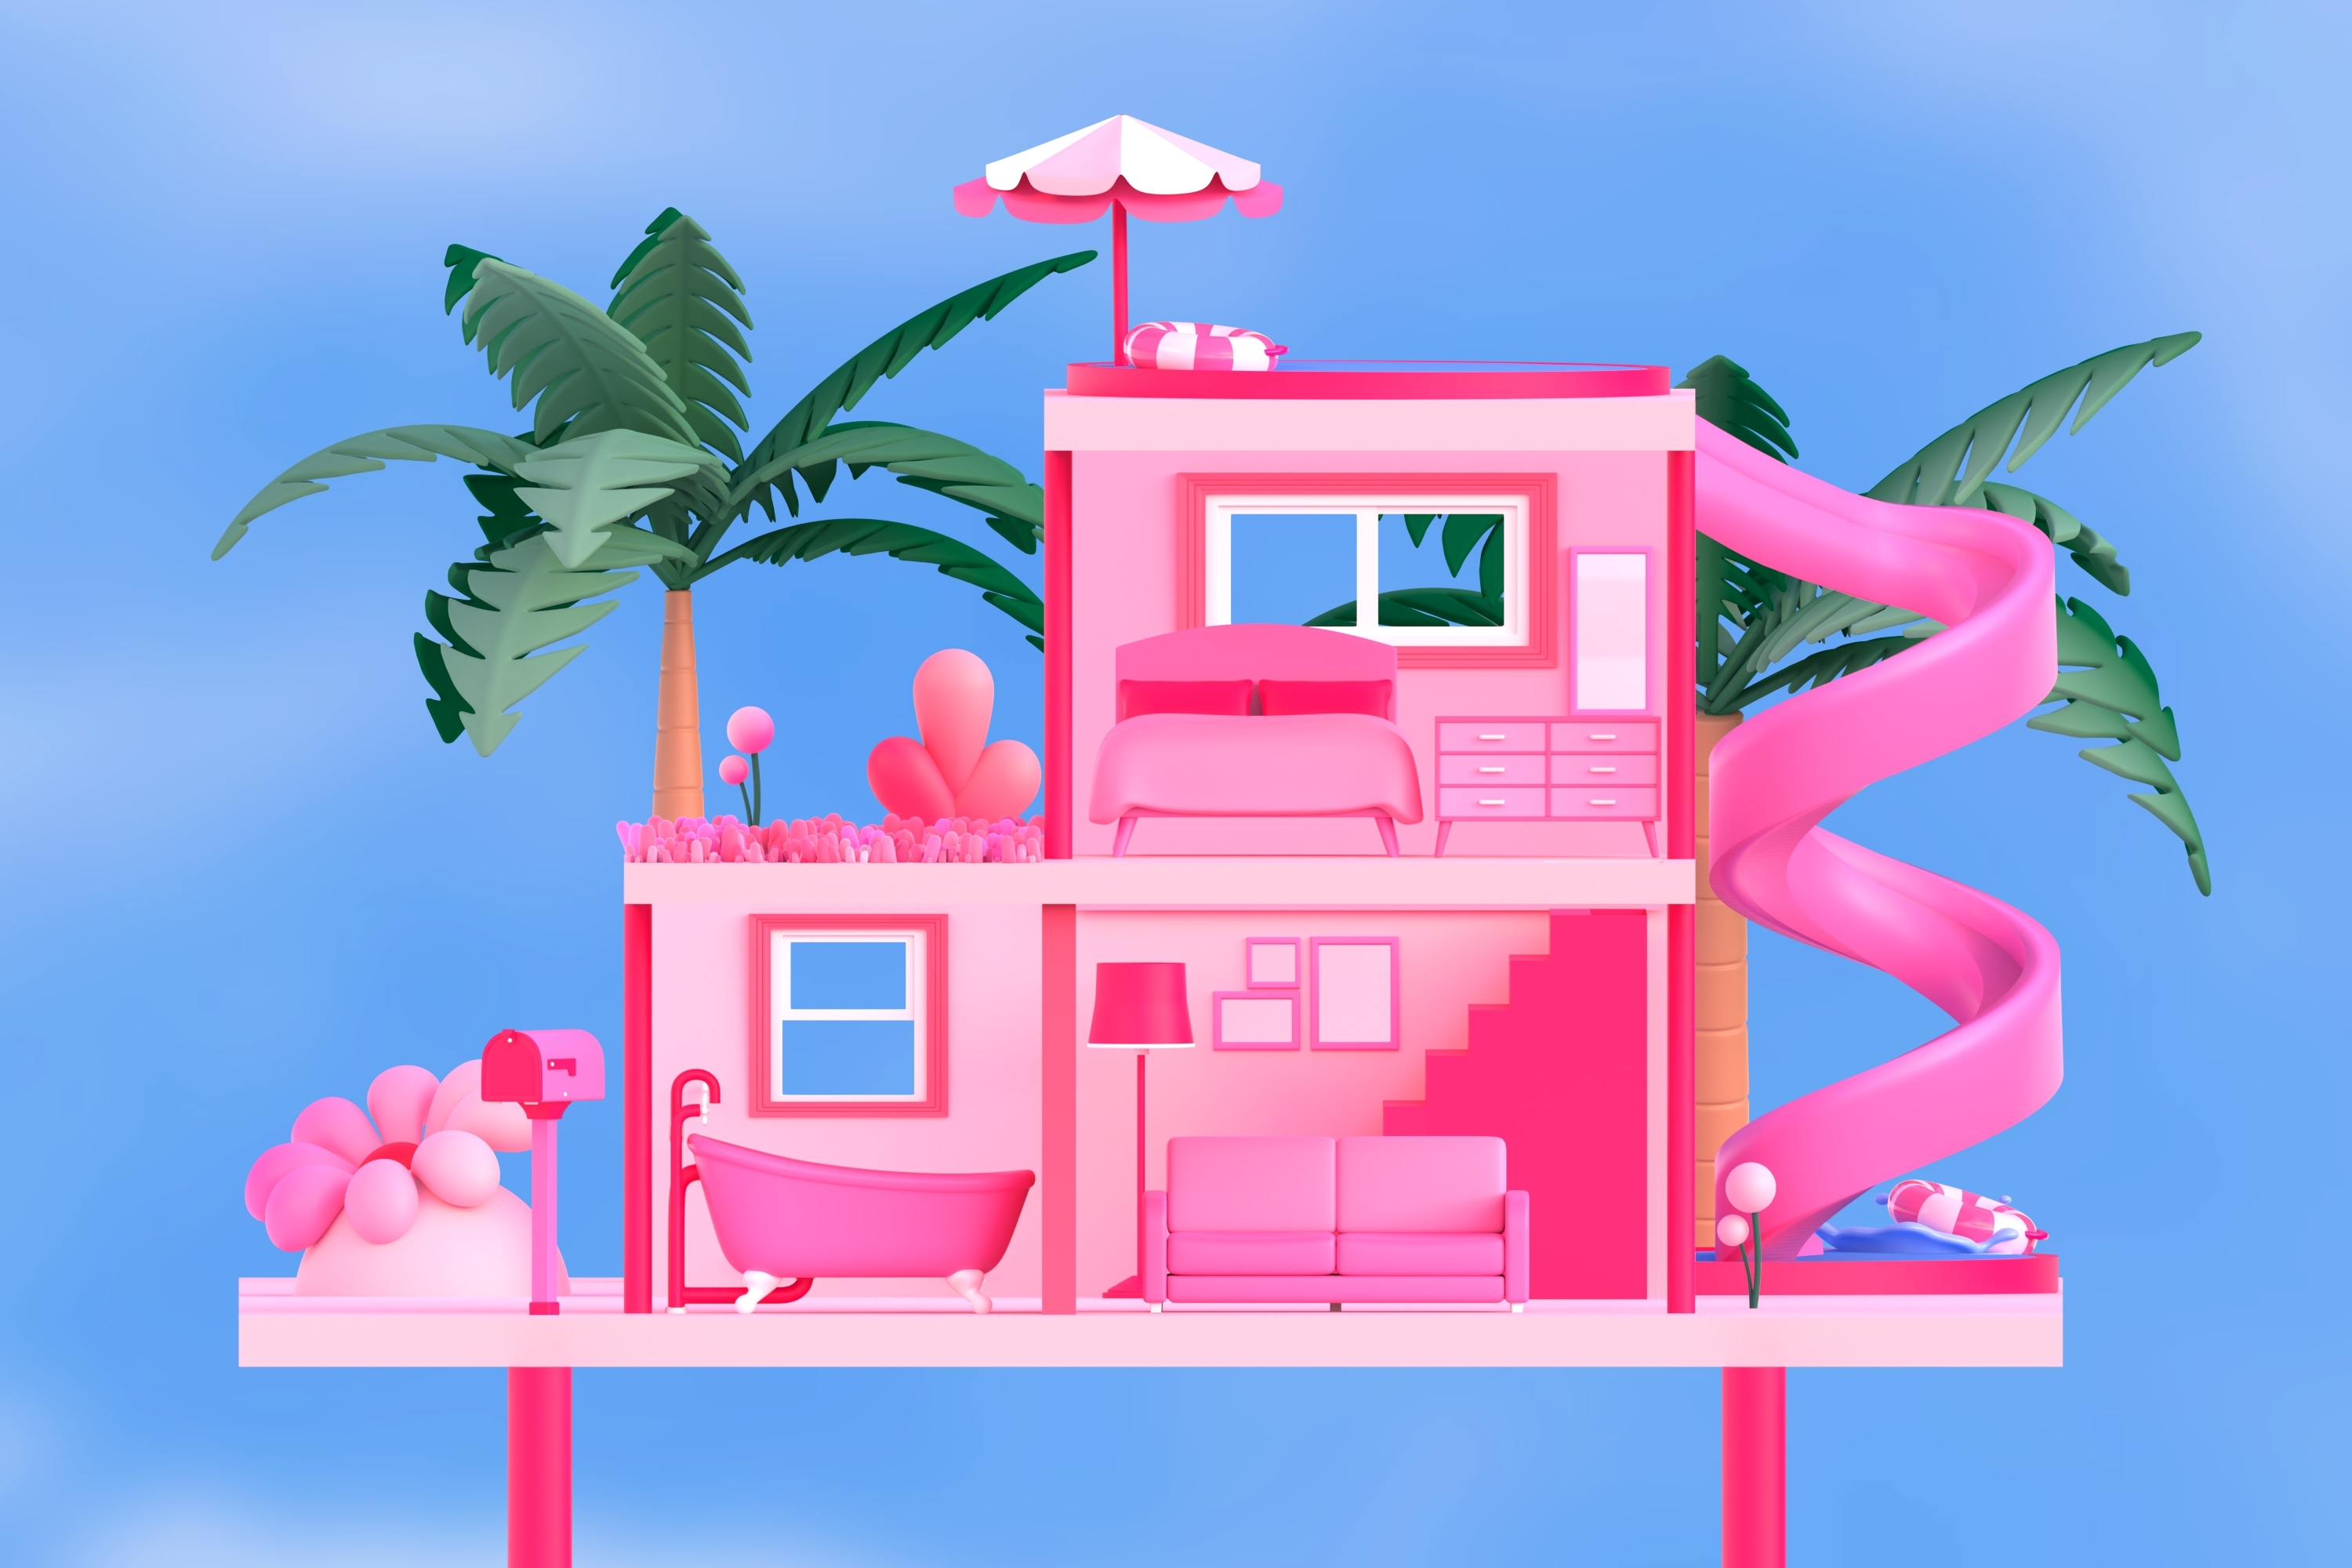 An illustration shows a simulated version of Barbie’s Dream House